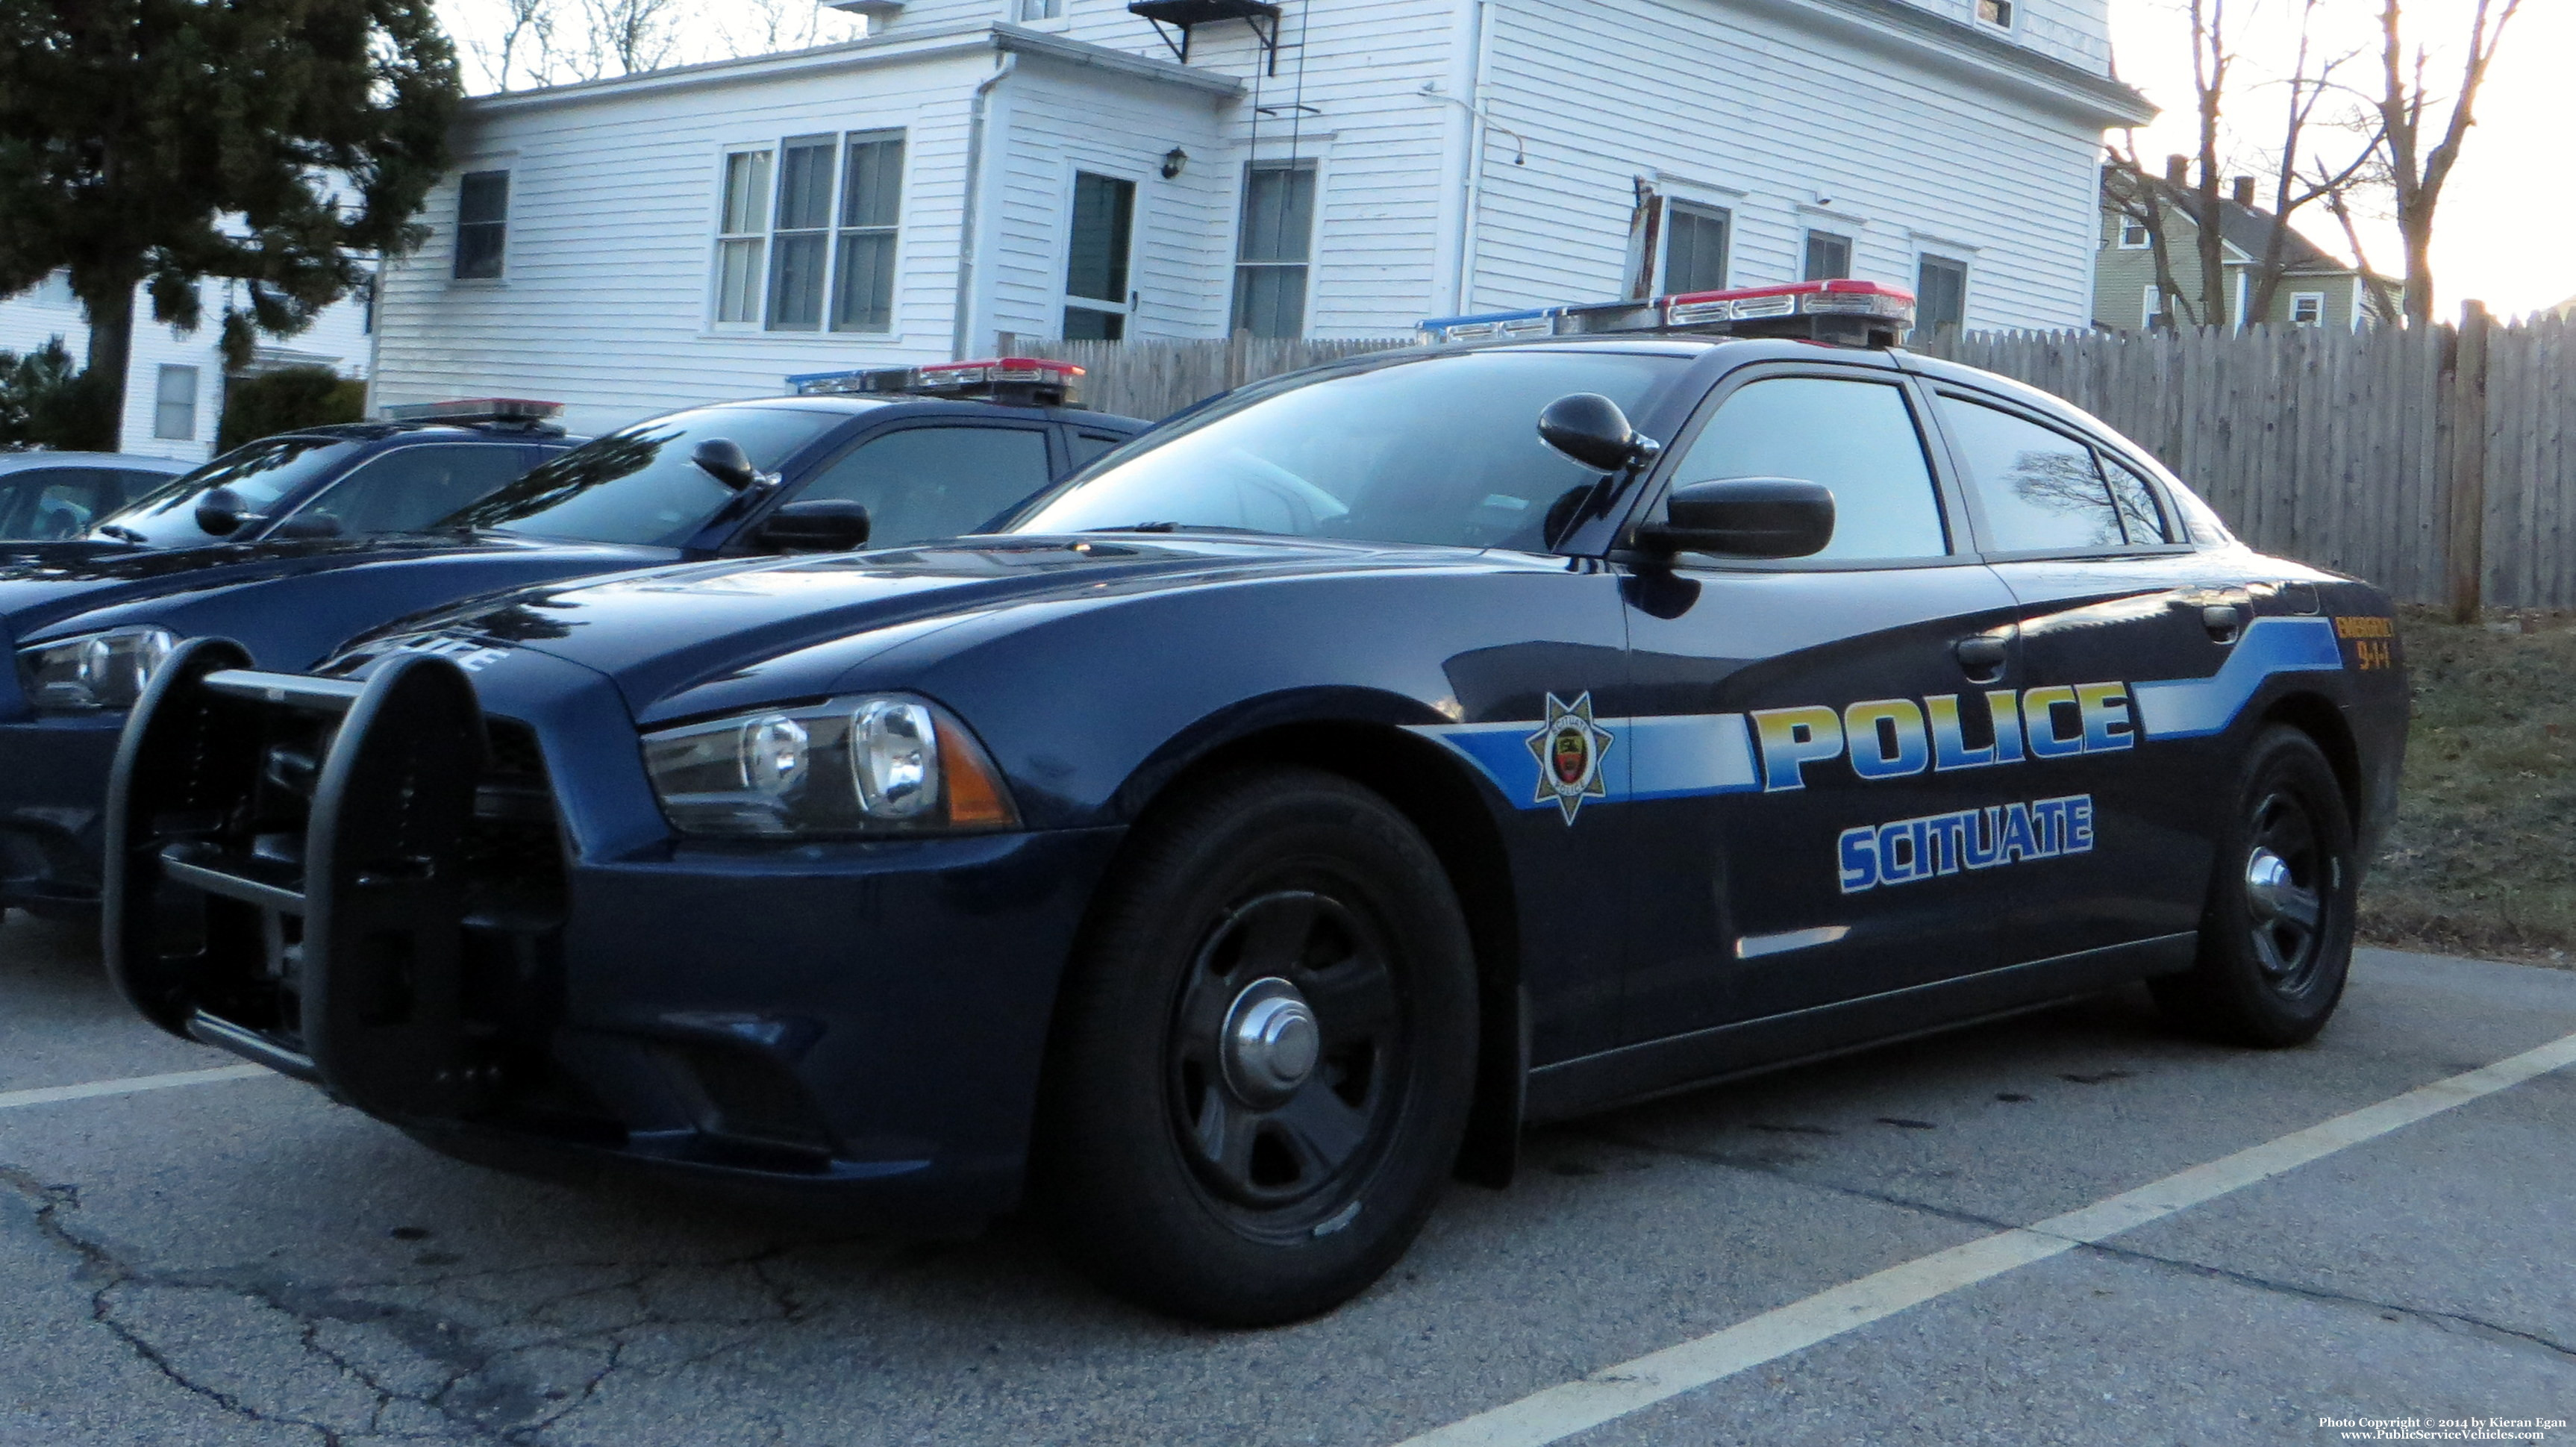 A photo  of Scituate Police
            Cruiser 706, a 2014 Dodge Charger             taken by Kieran Egan